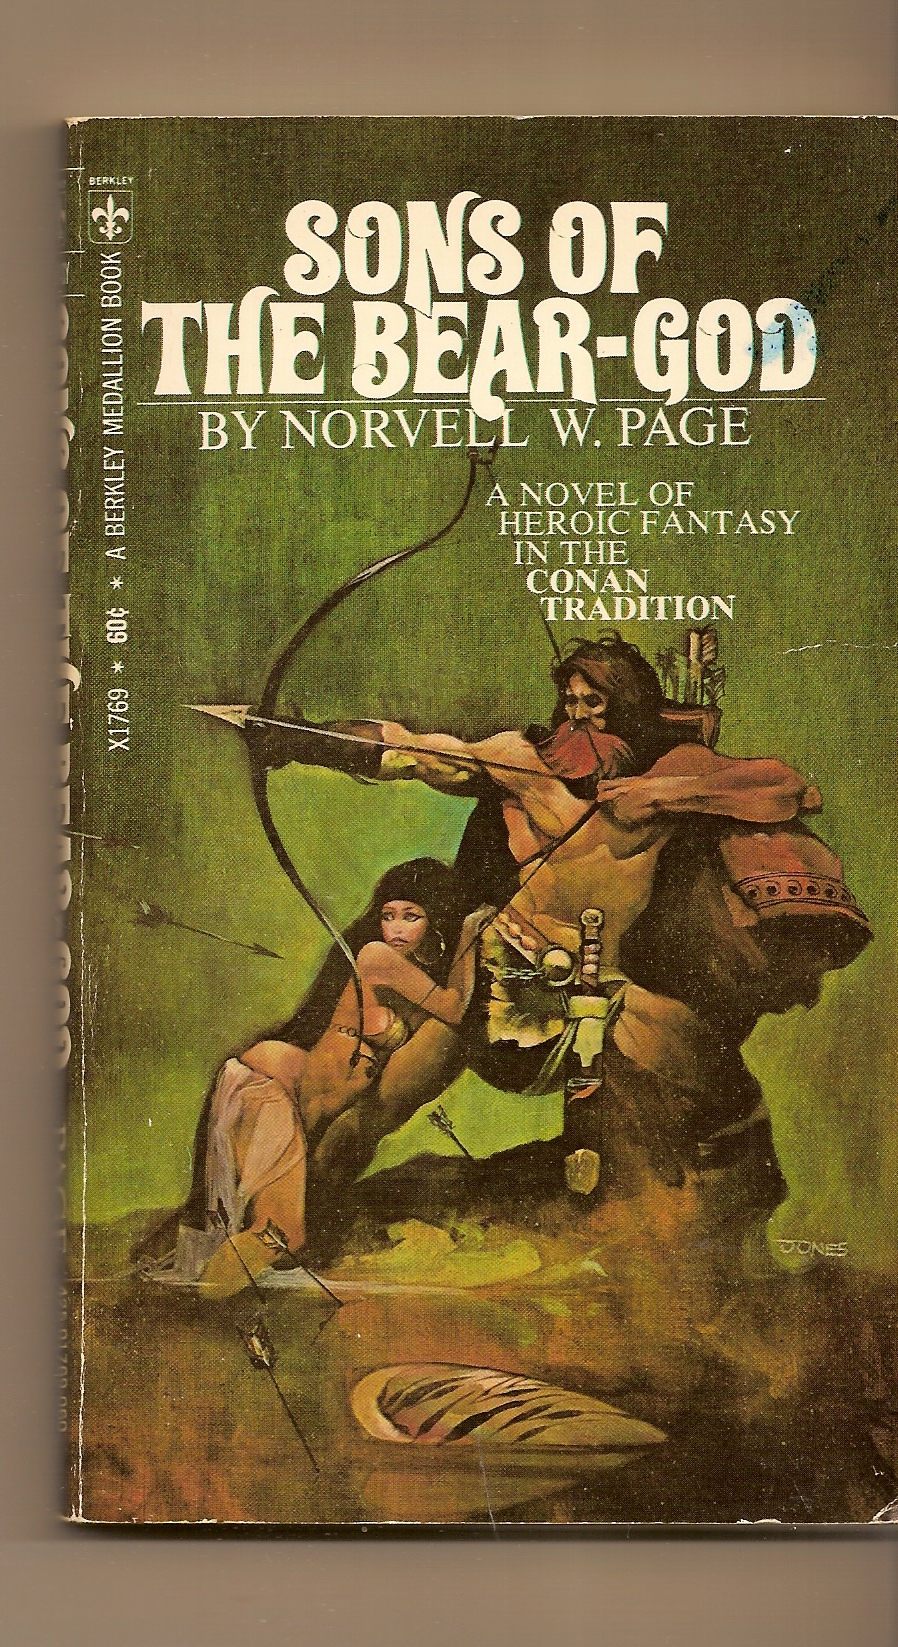 PAGE NORVELL W. - Sons of the Bear-God